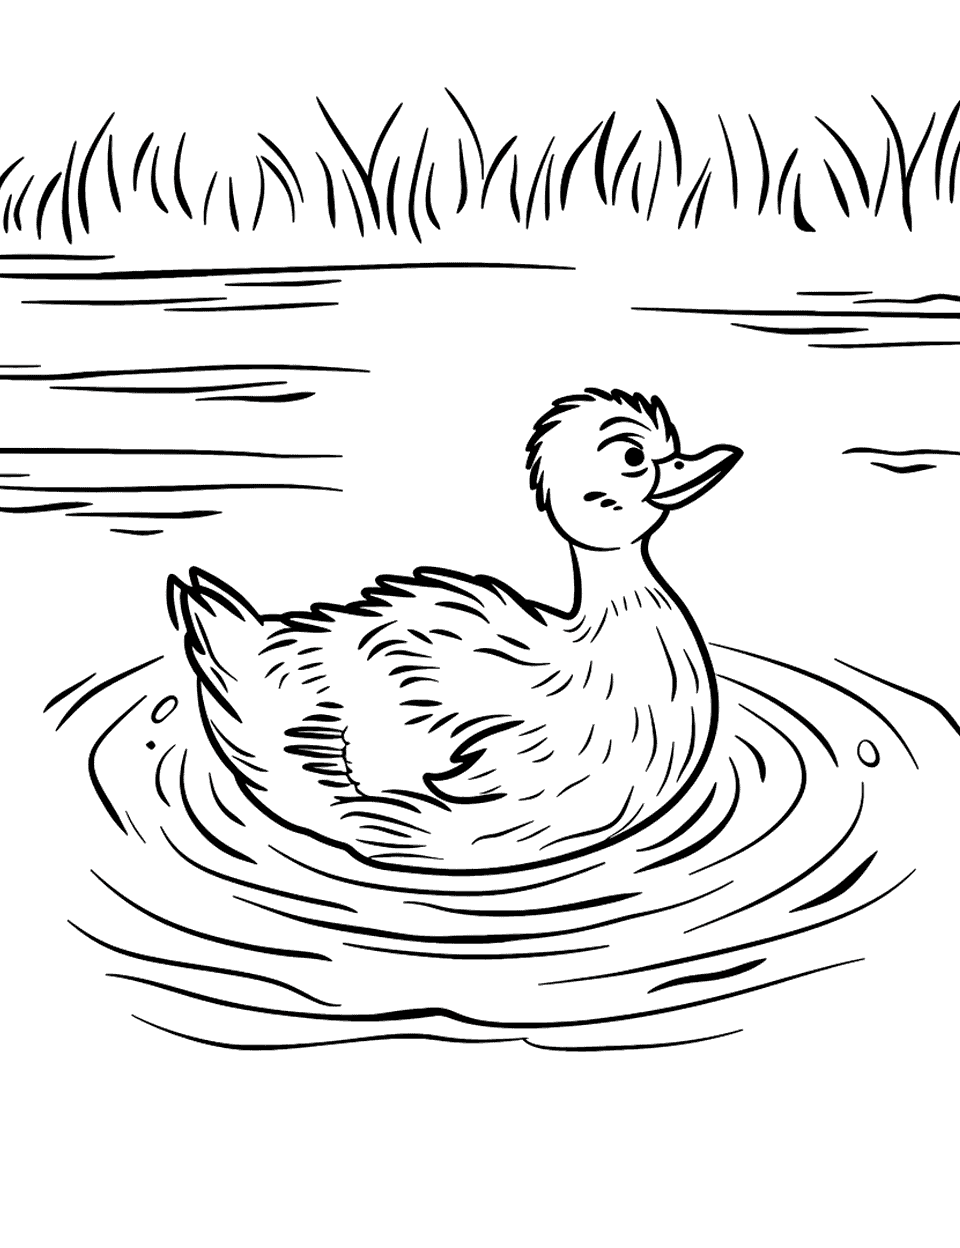 Duck Swimming in a Pond Farm Animal Coloring Page - A duck gliding across a pond with ripples trailing behind.